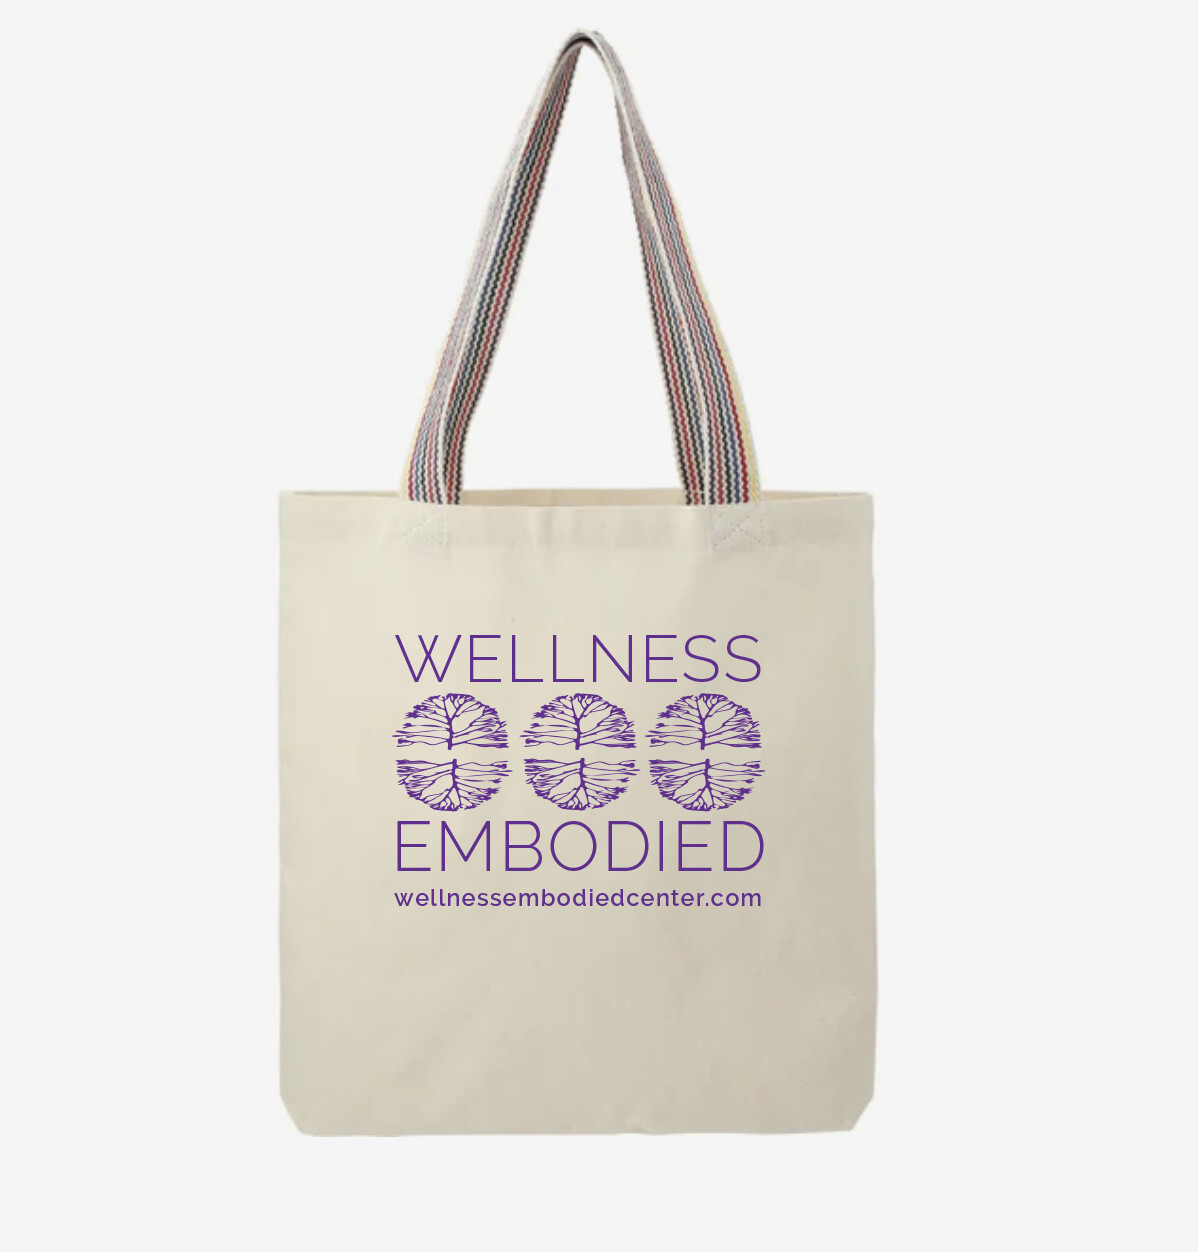 Wellness Embodied Tote Bag